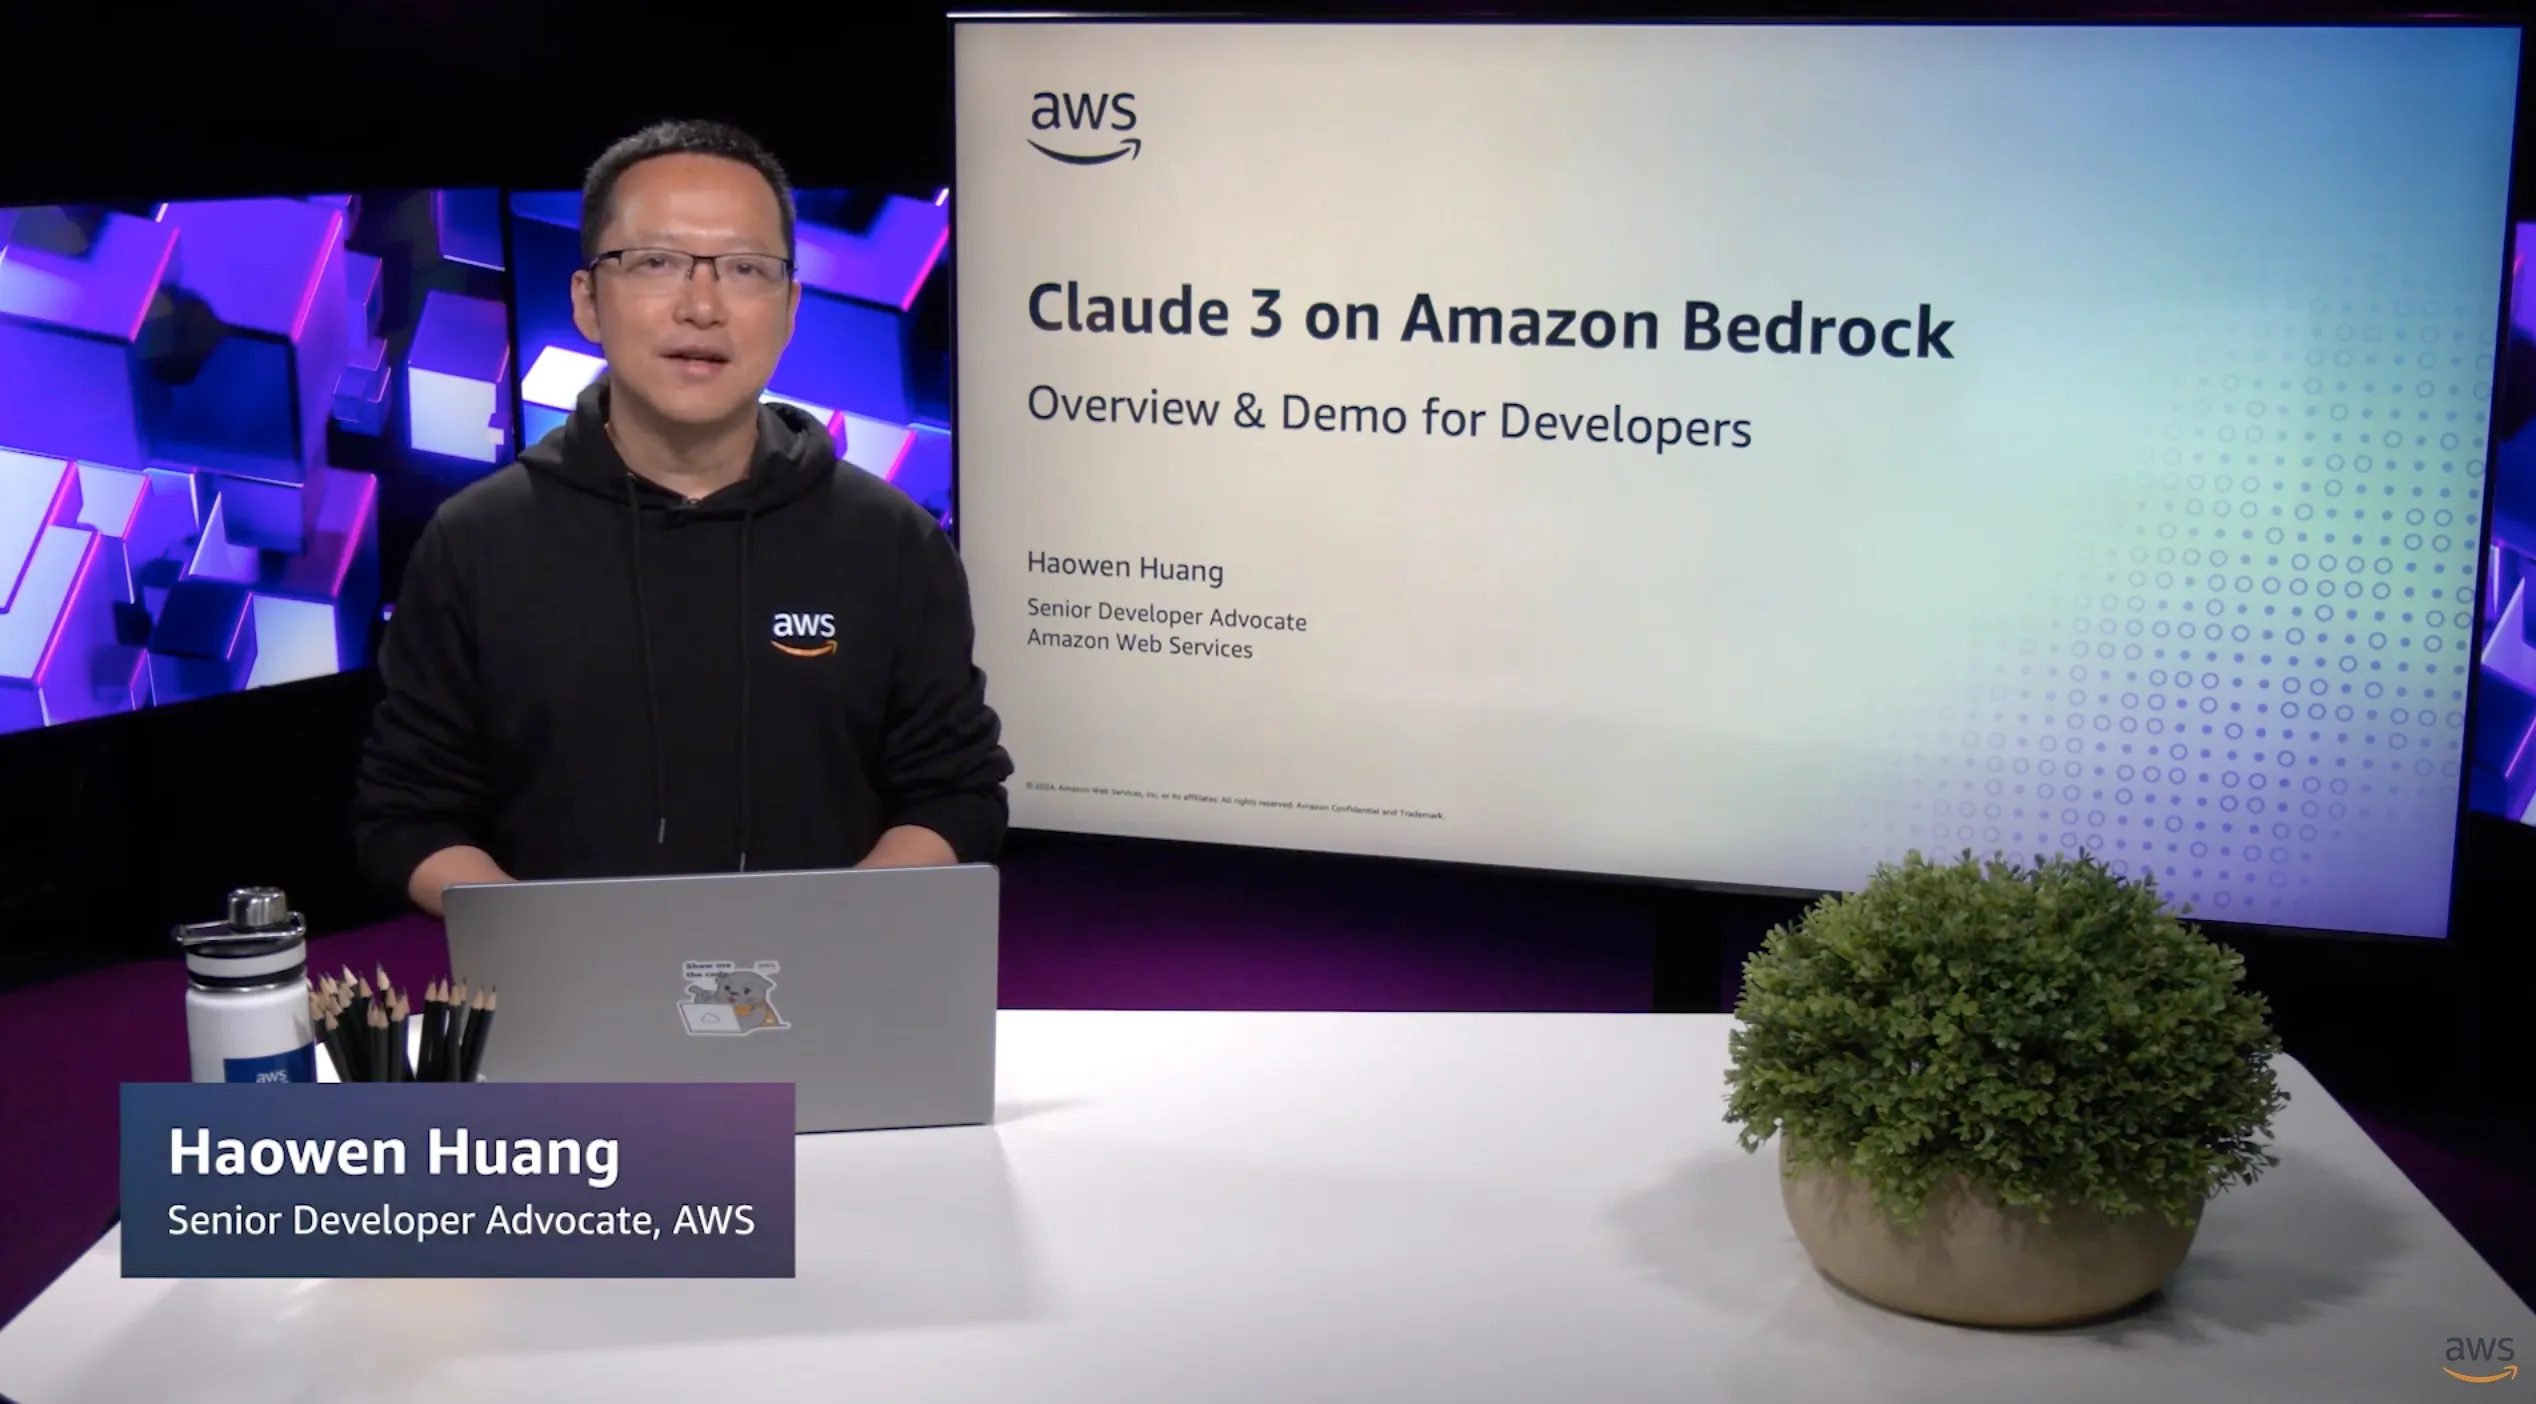 Mastering Amazon Bedrock with Claude 3: Developer's Guide with Demos